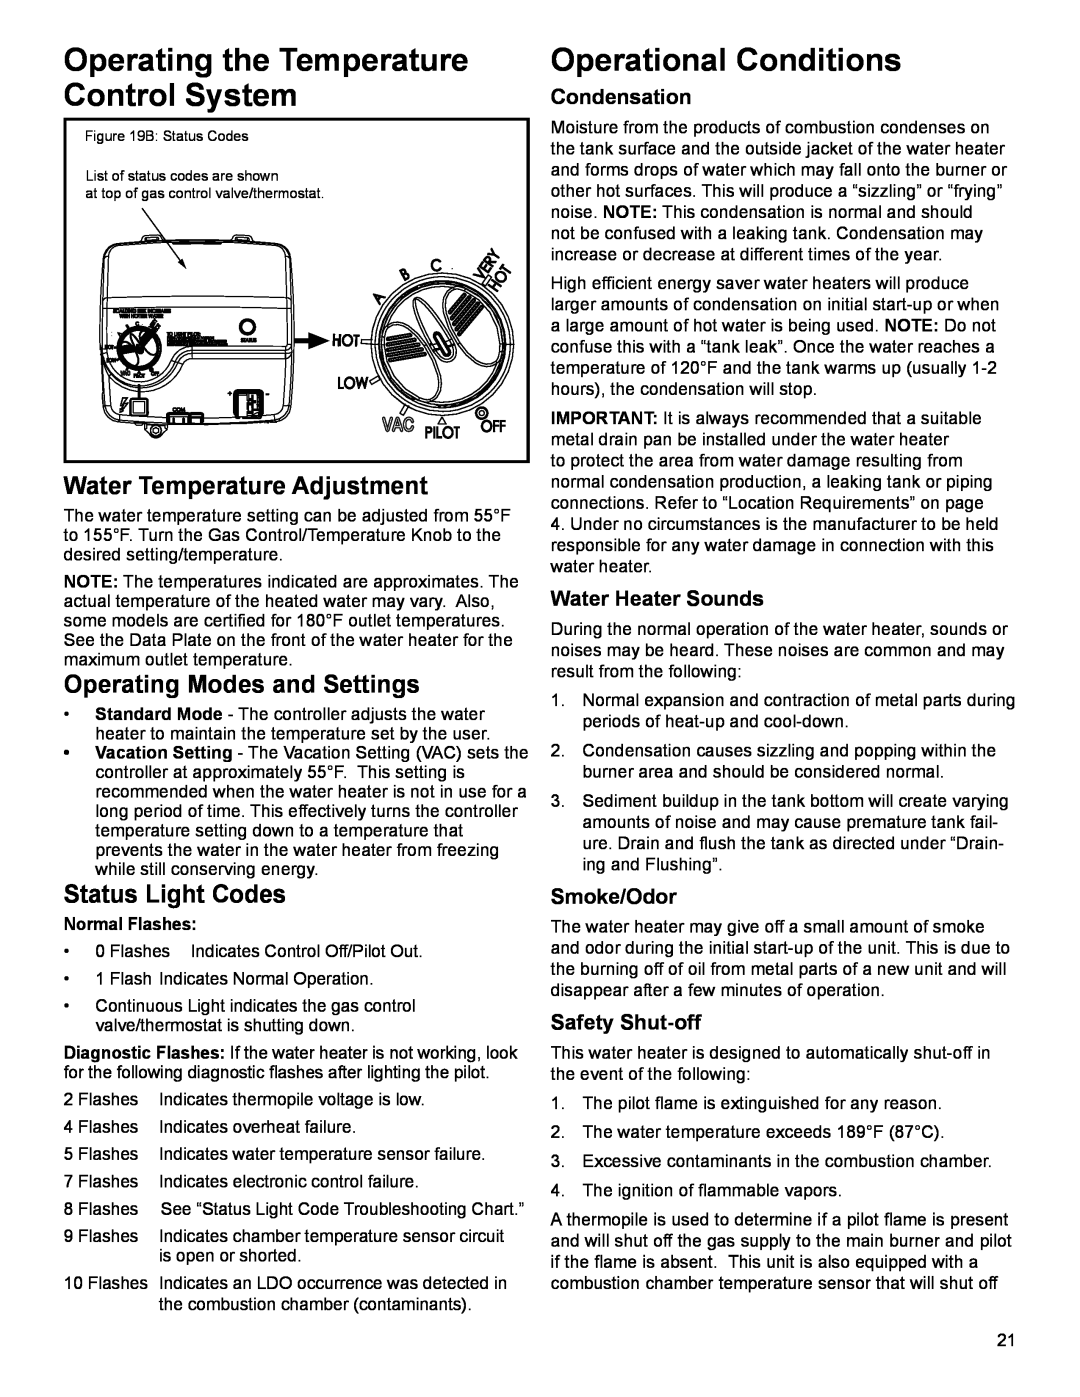 American Water Heater 318935-003 Operating the Temperature Control System, Operational Conditions, Status Light Codes 